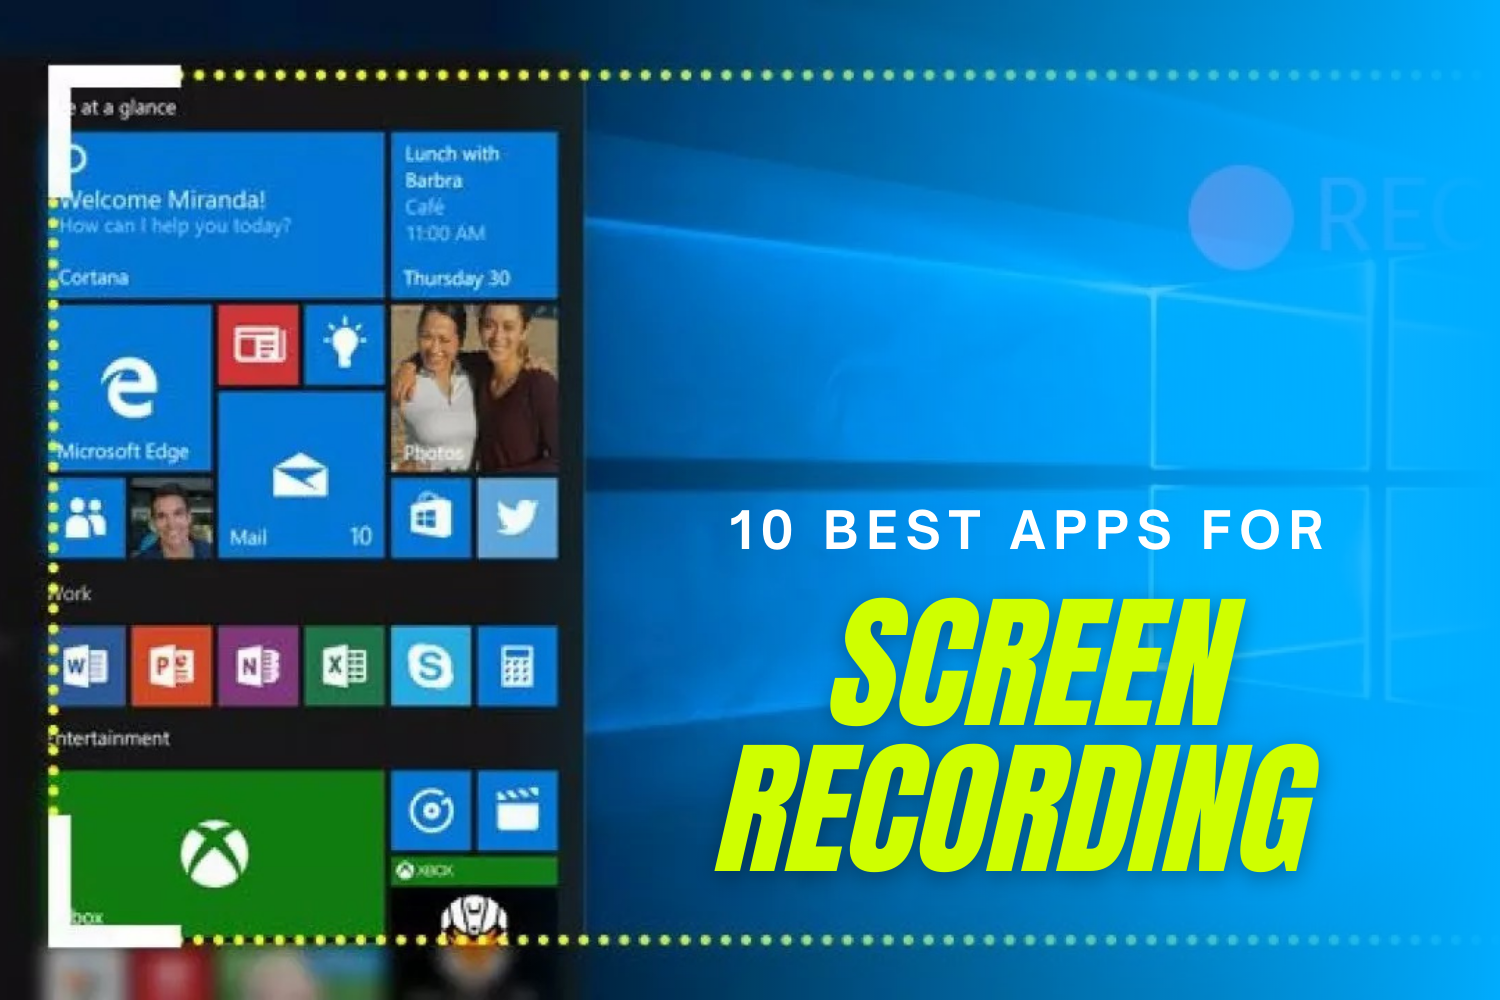 10 Best Apps for Screen Recording to enhance your Blog & Social Media Content